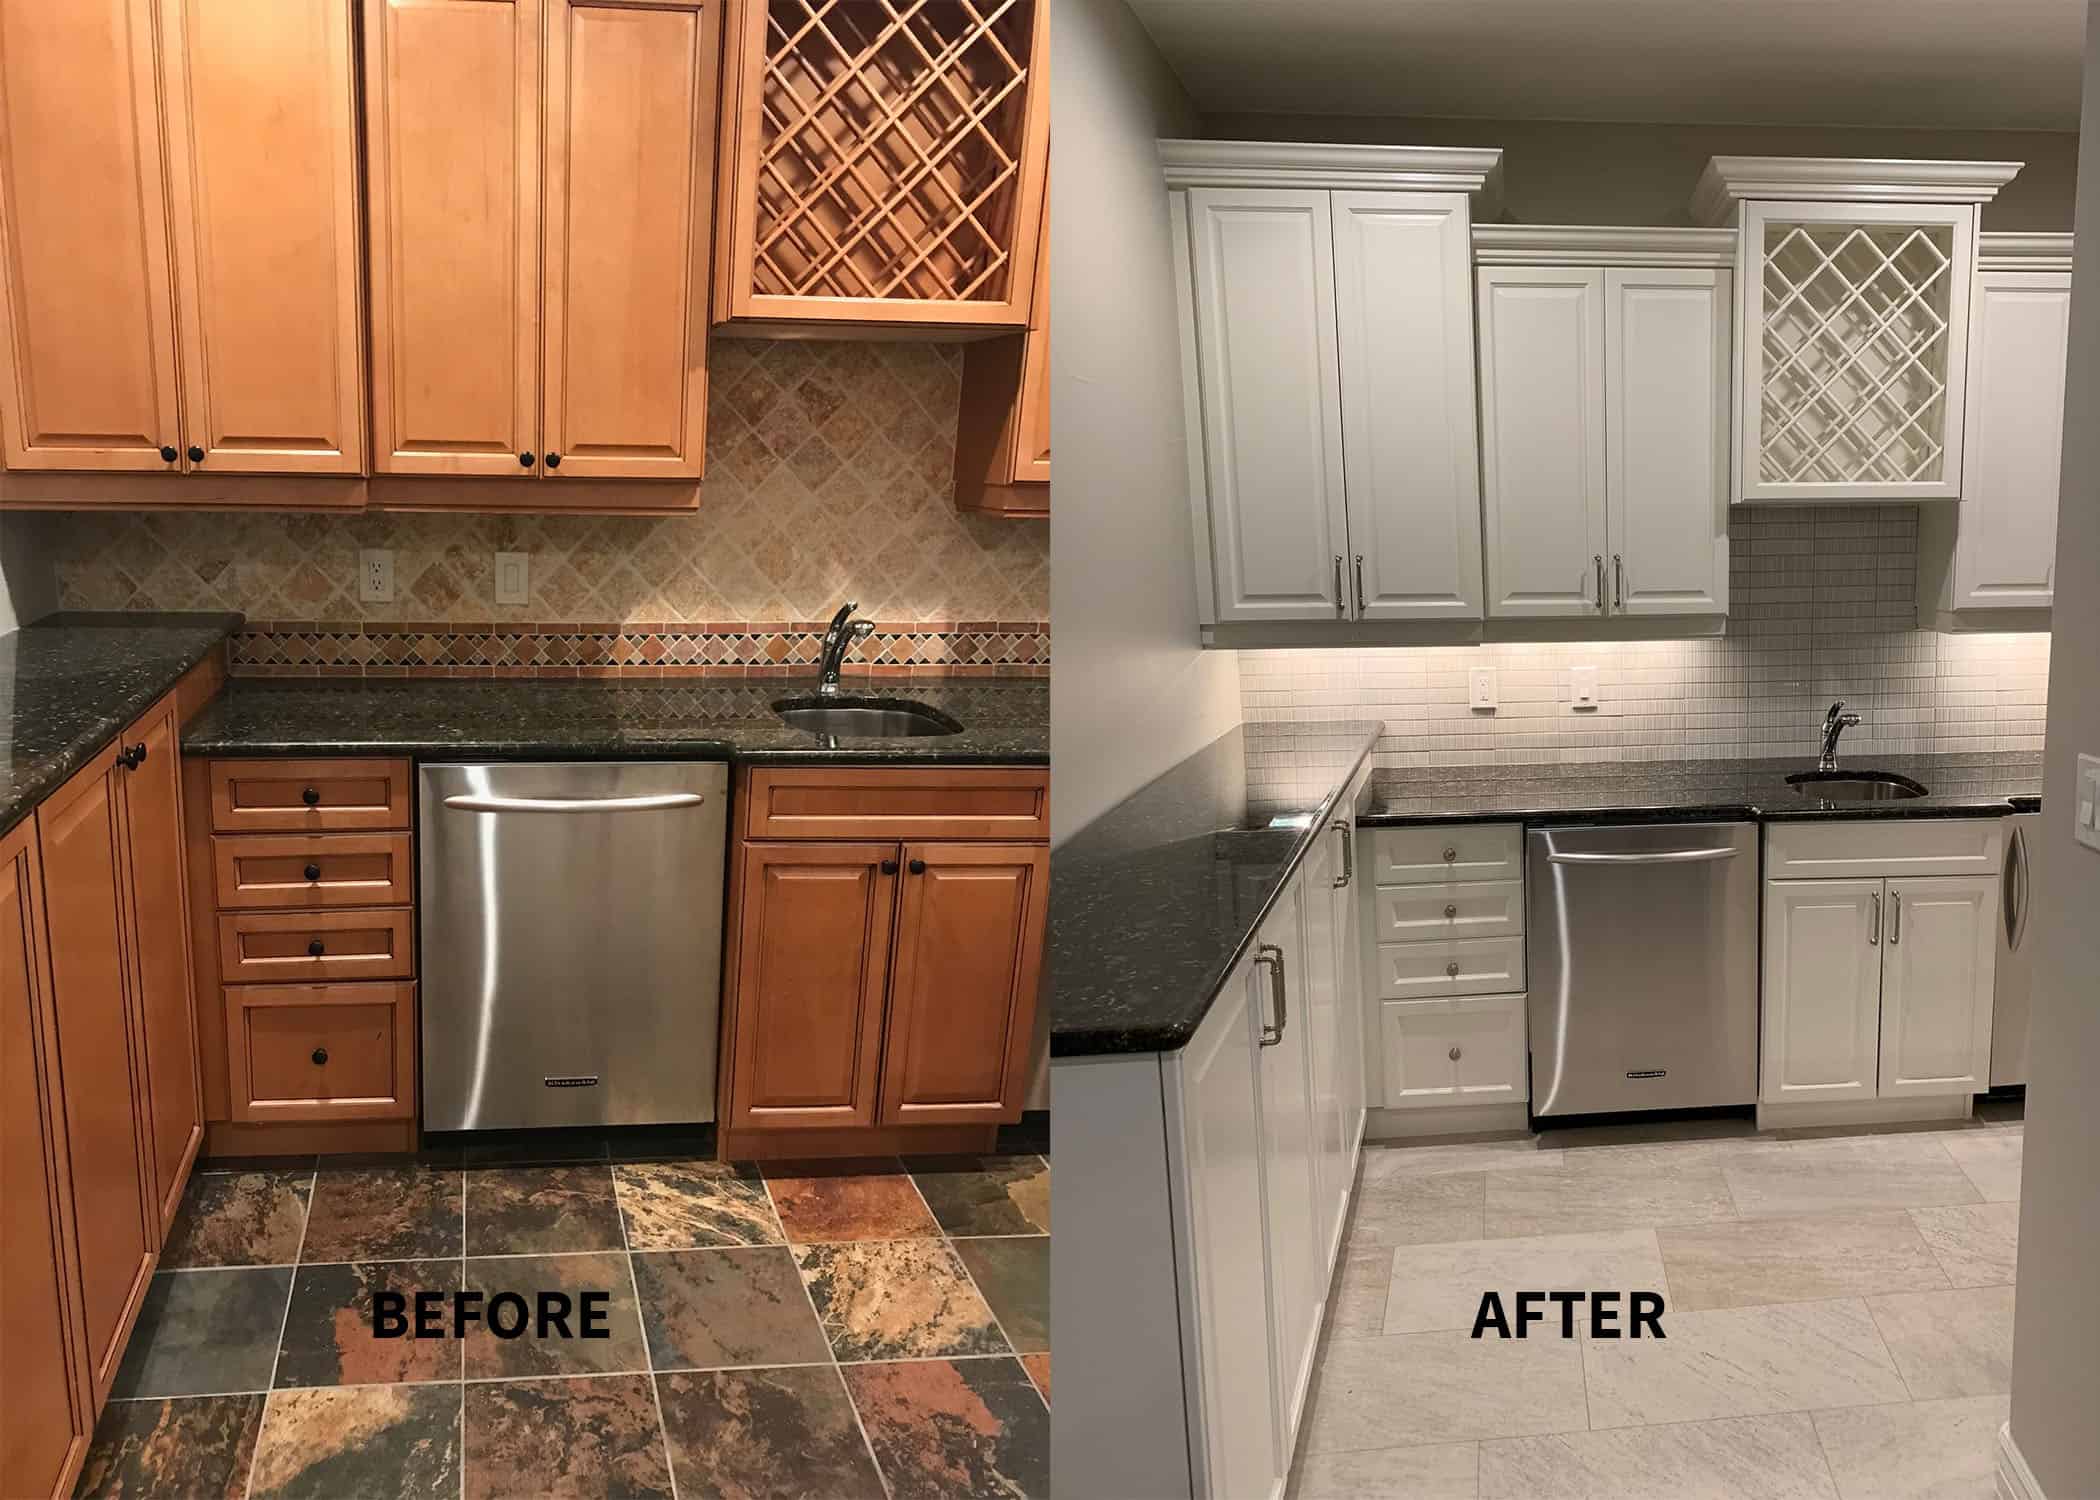 Should I Paint My Kitchen Cabinets? - Helix Painting